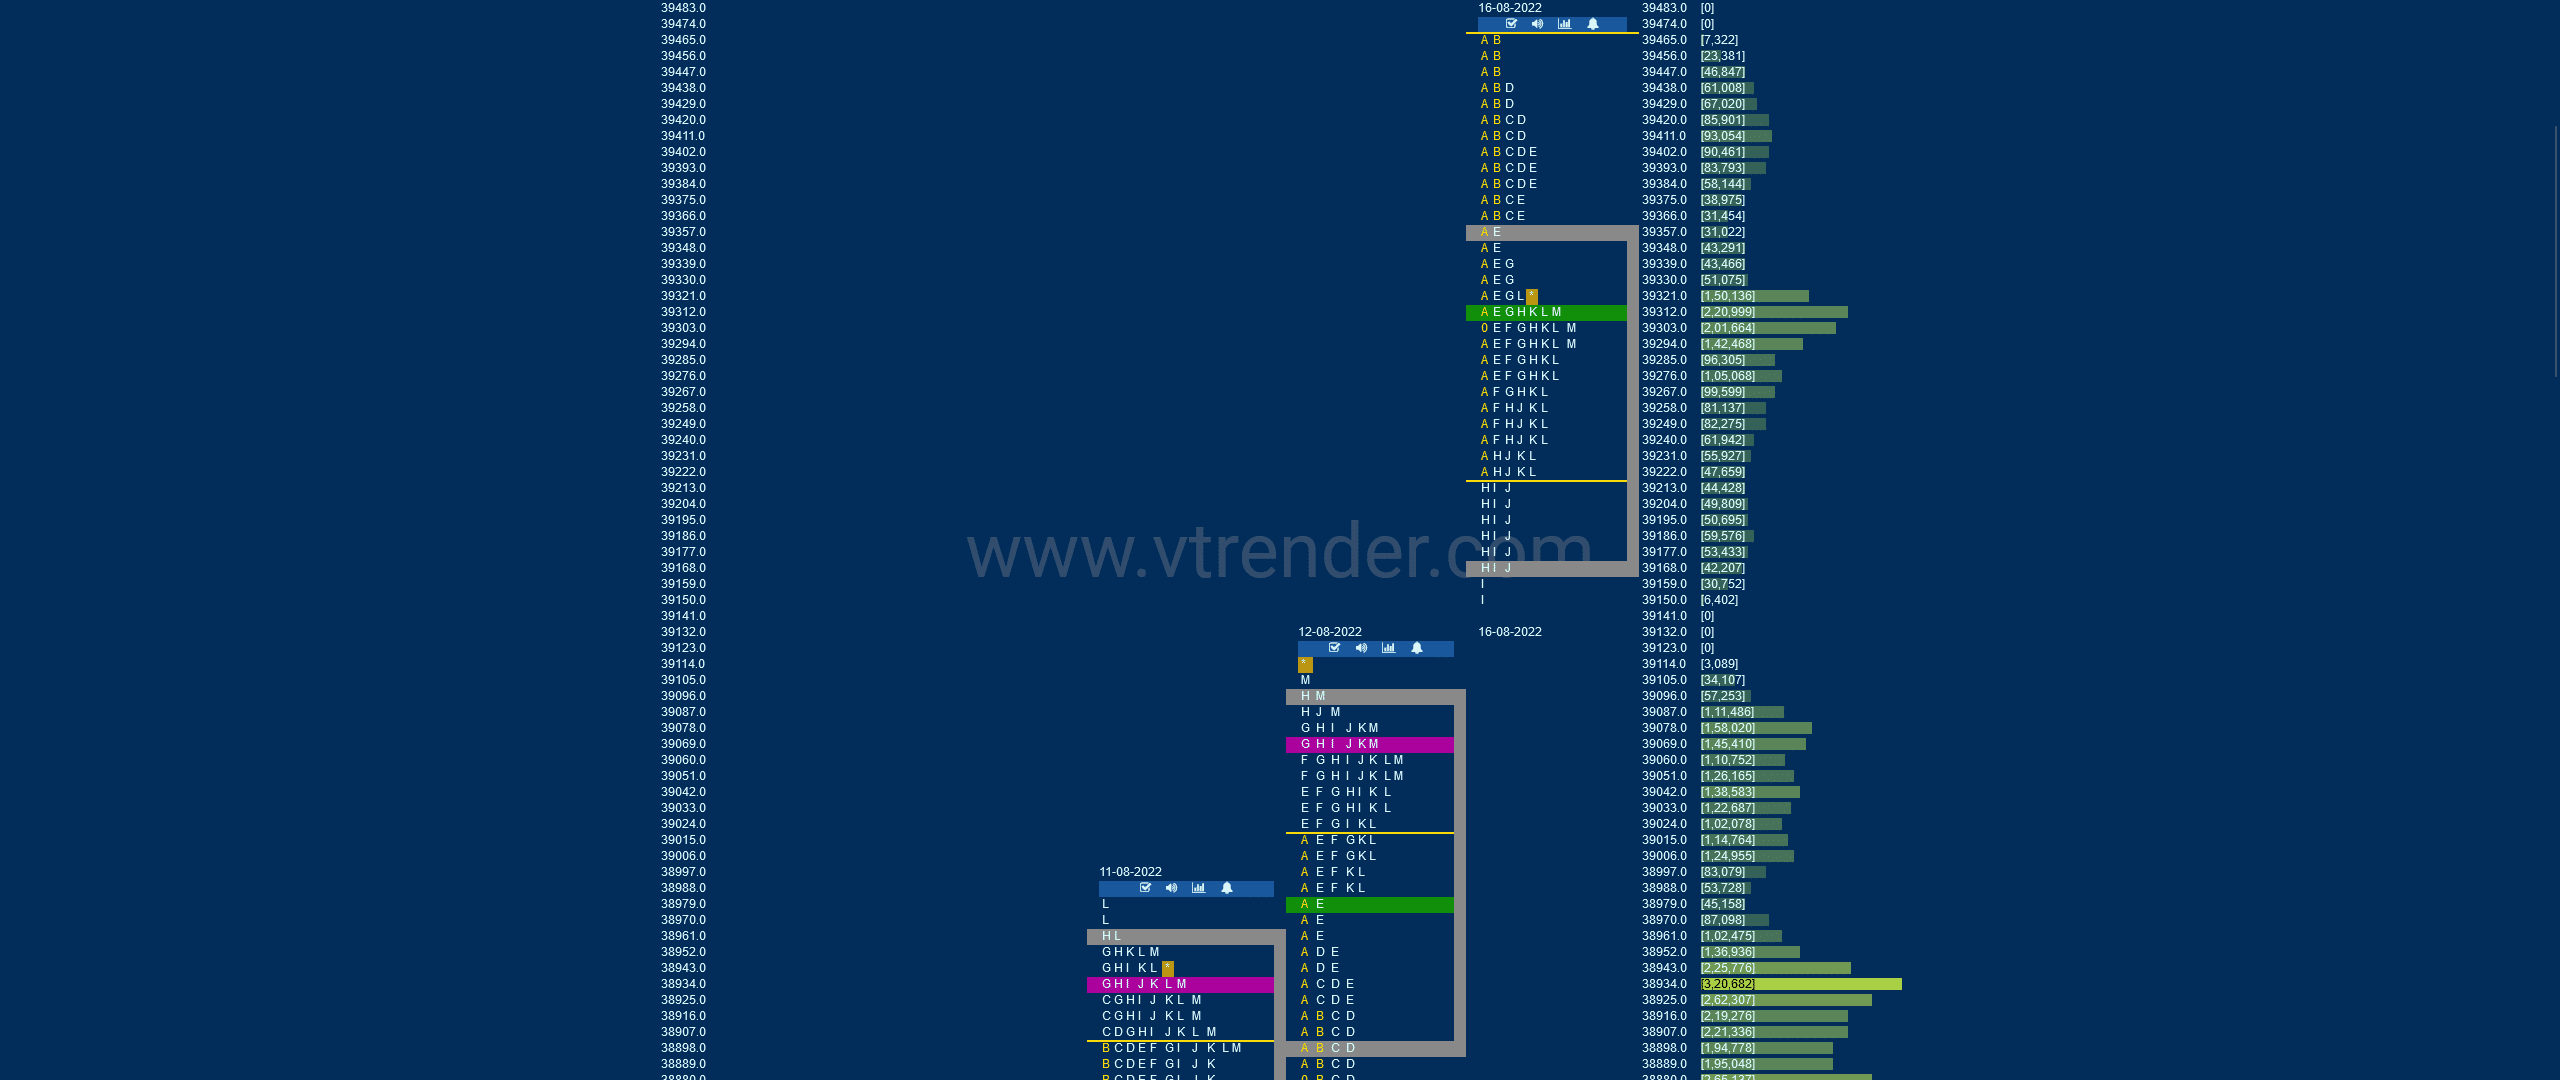 Bnf 10 Market Profile Analysis Dated 16Th Aug 2022 Banknifty Futures, Charts, Day Trading, Intraday Trading, Intraday Trading Strategies, Market Profile, Market Profile Trading Strategies, Nifty Futures, Order Flow Analysis, Support And Resistance, Technical Analysis, Trading Strategies, Volume Profile Trading